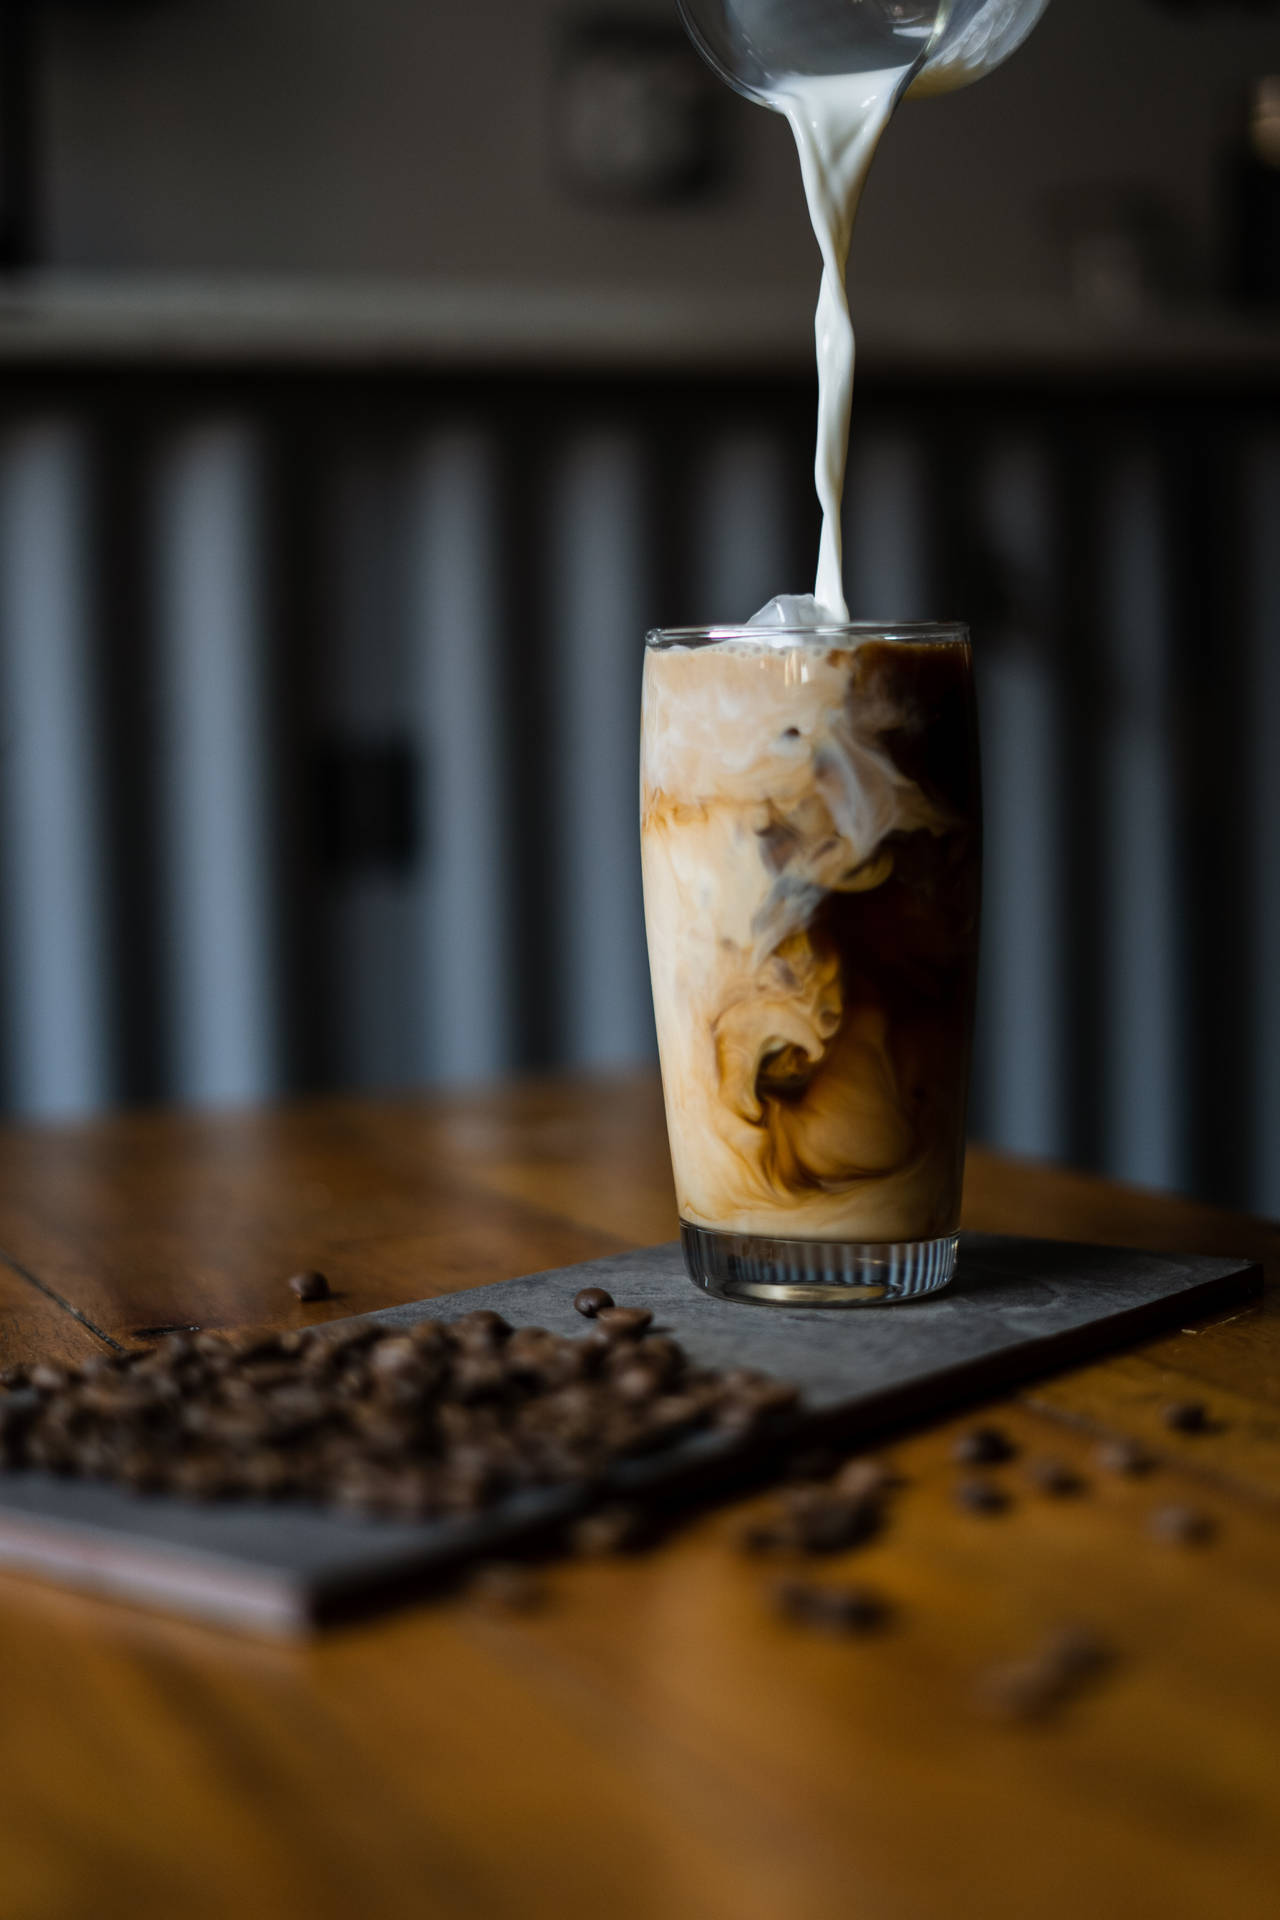 The perfect combination of creamy milk and rich coffee. Wallpaper